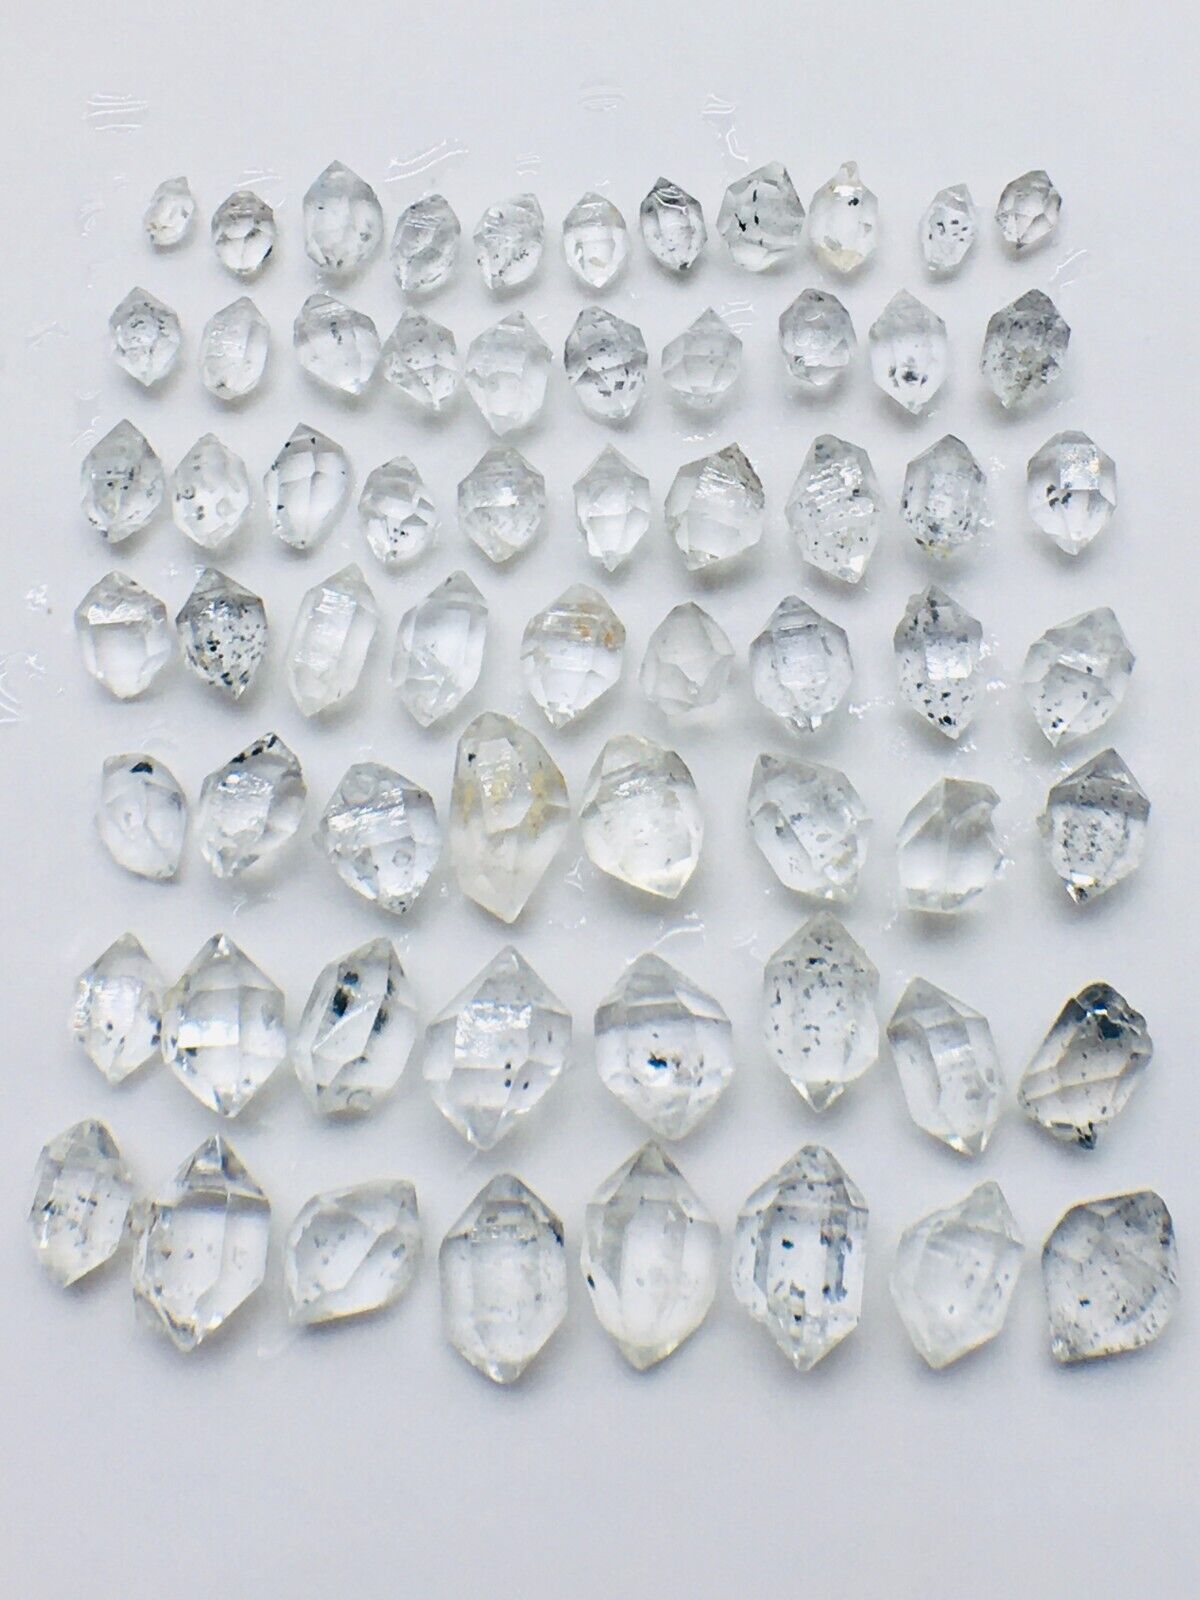 64pc Herkimer Diamond AAA small 4mm to10mm Top gem crystal From-NY  50ct F12